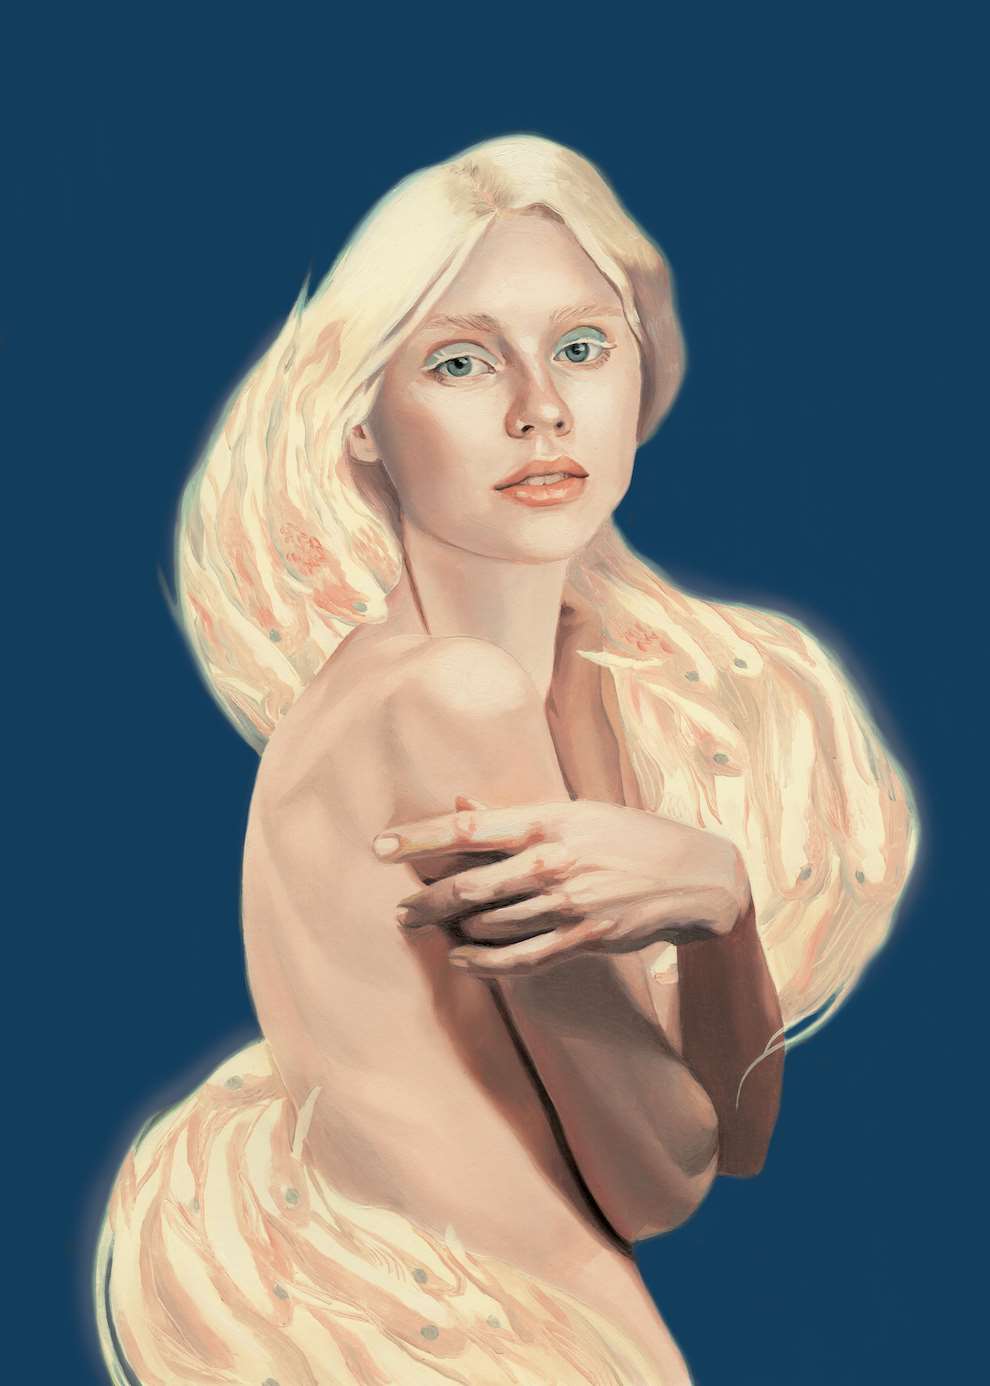 David De Las Heras, Intricate realistic hand painted portrait of a woman with long blonde hair hugging herself on blue background. 